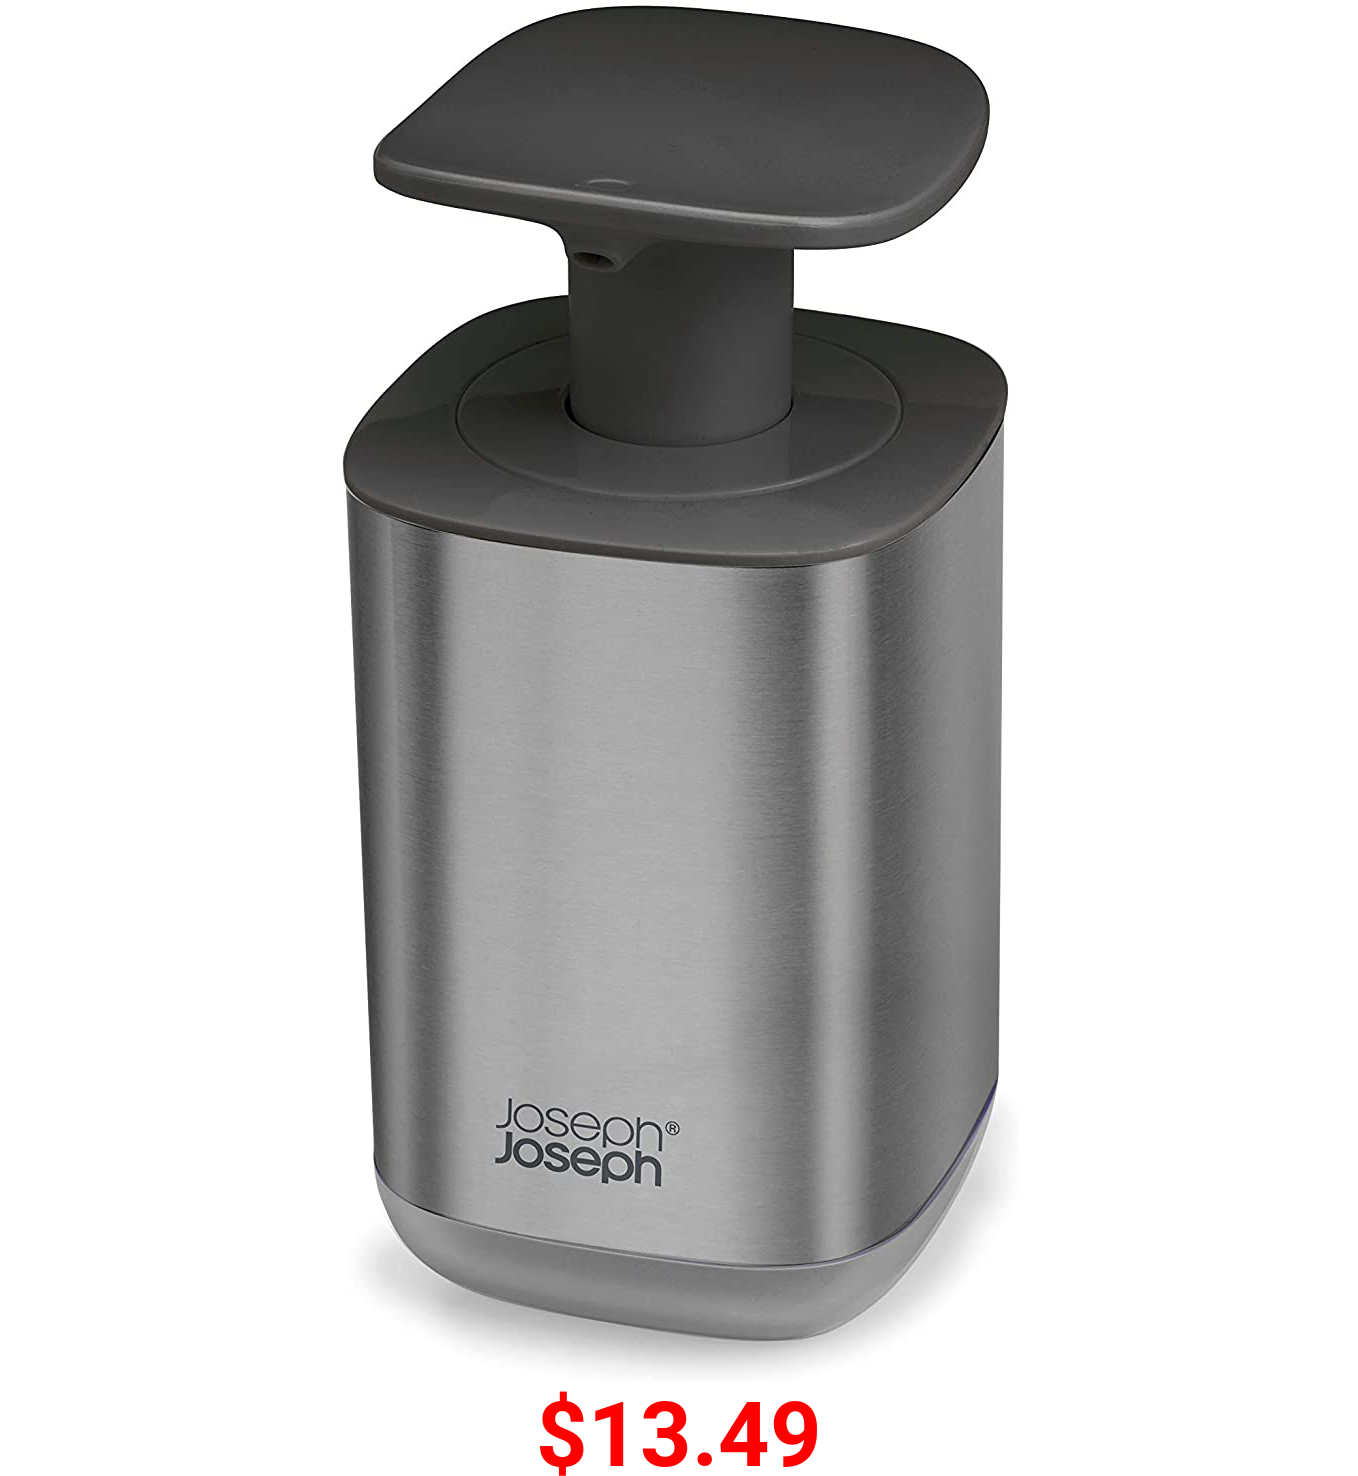 Joseph Joseph Presto Stainless-Steel Hygienic Easy-Push Soap Dispenser with Wide Pump, One-Size, Stainless Steel/Gray